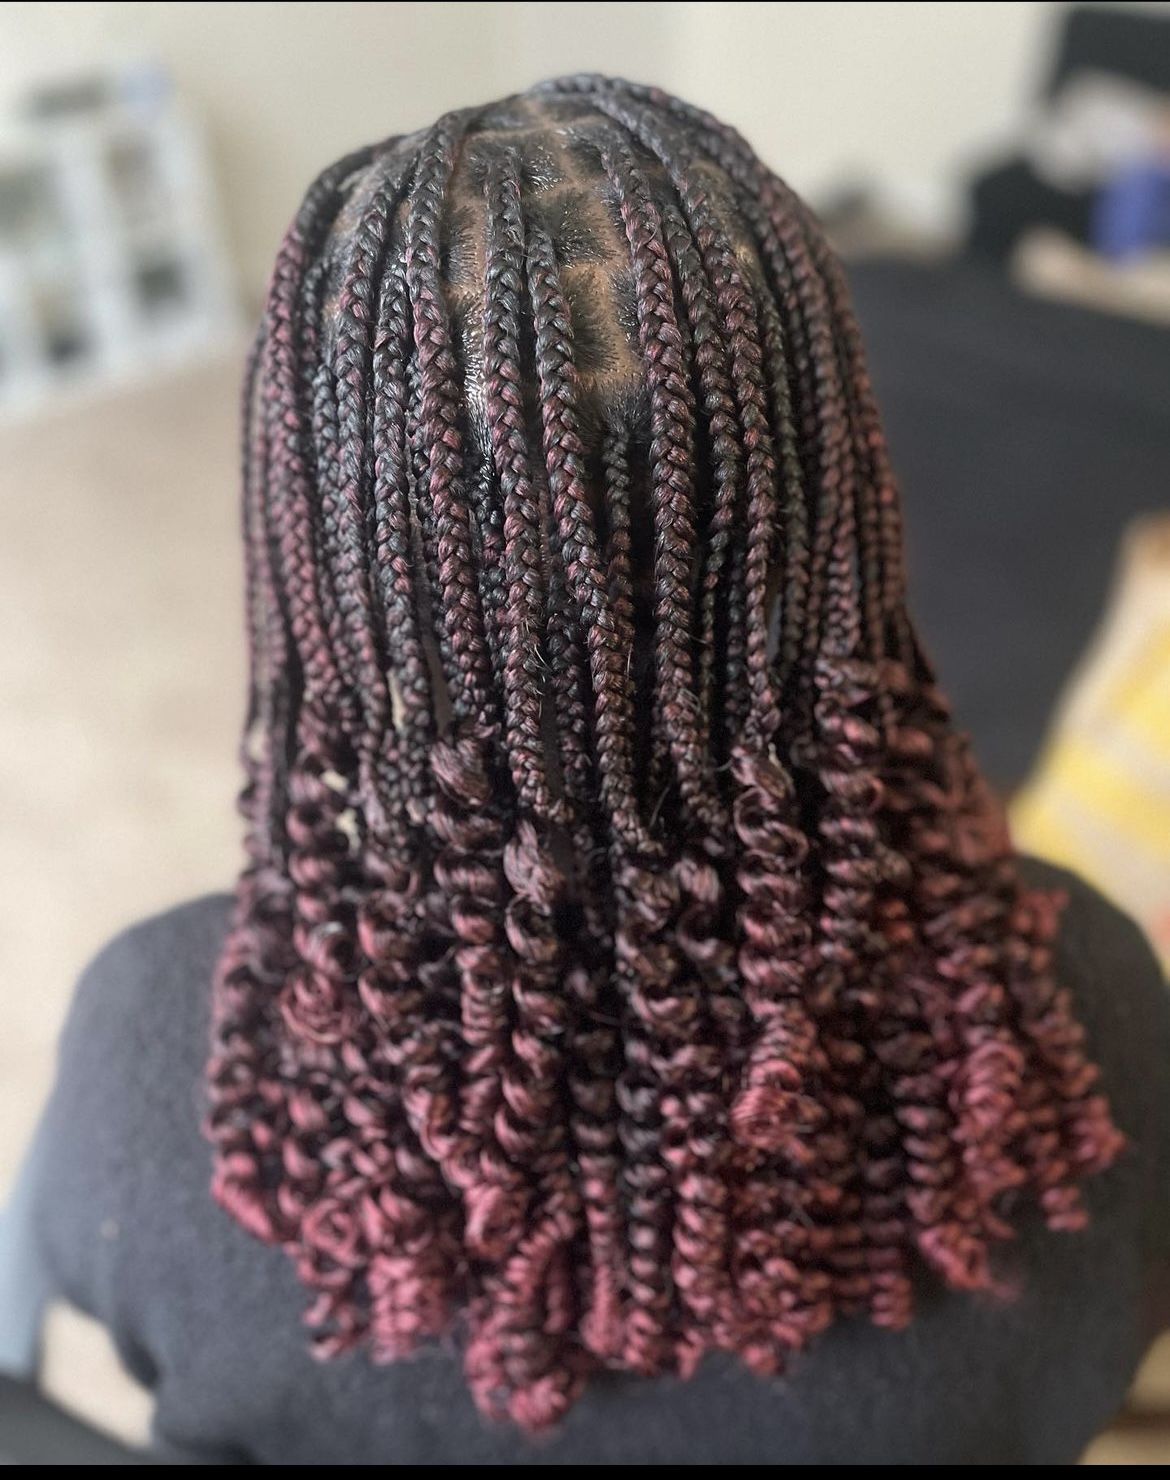 Knotless Braids W Curly Ends 